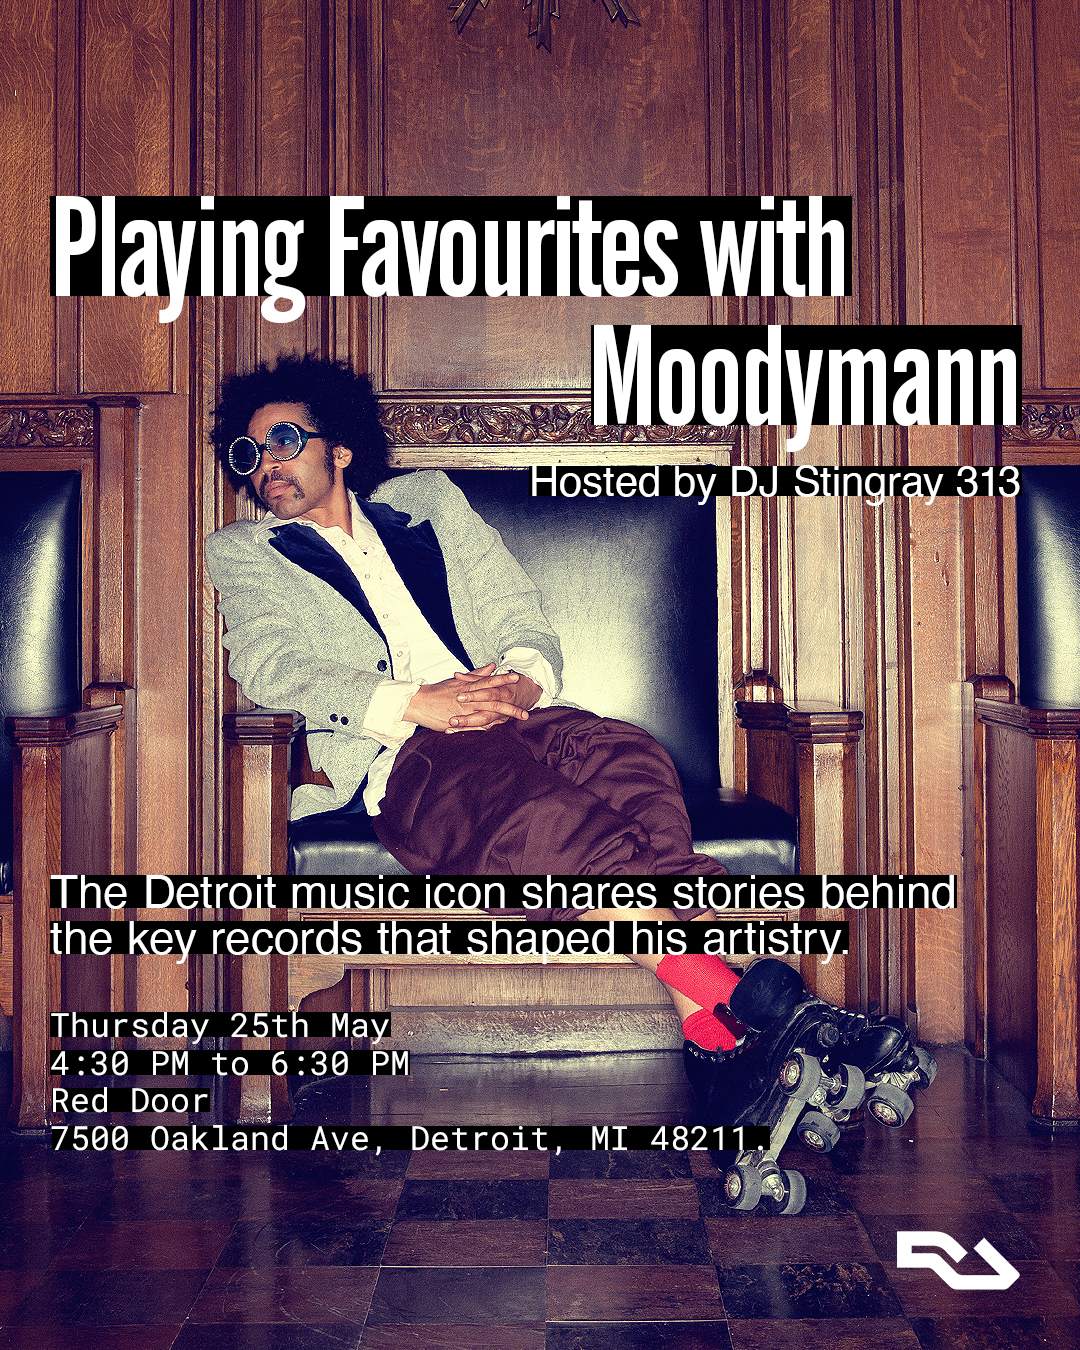 Playing Favourites with Moodymann - Página frontal